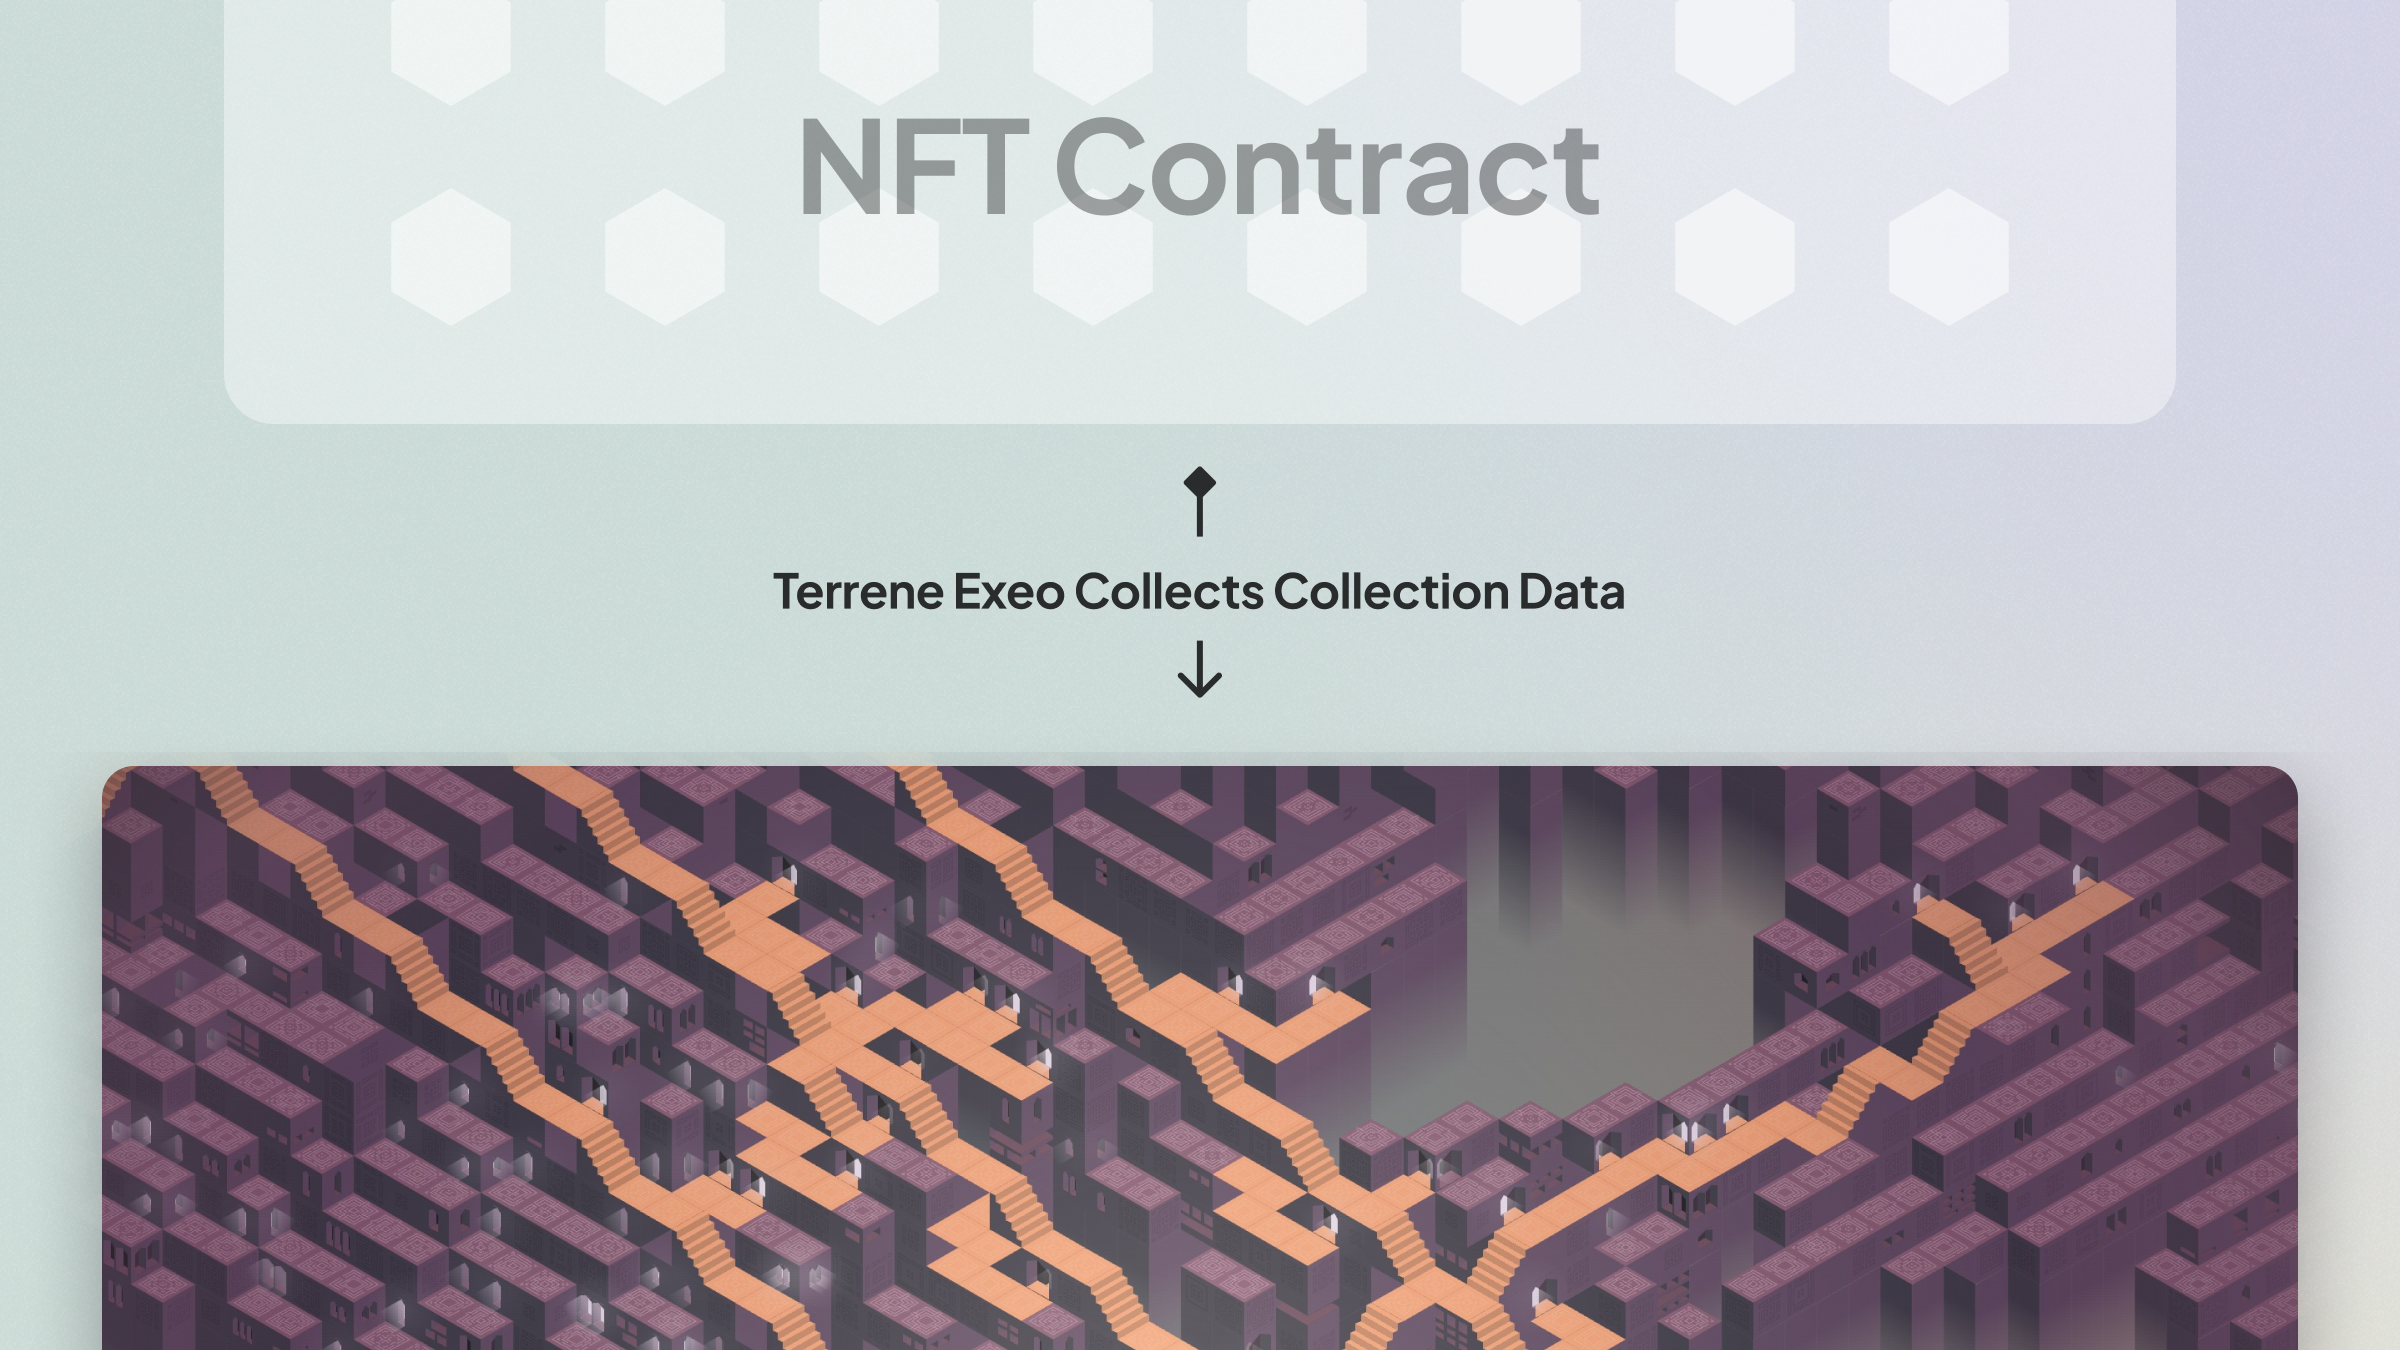 Creating Terrene Exeo with NFT contracts